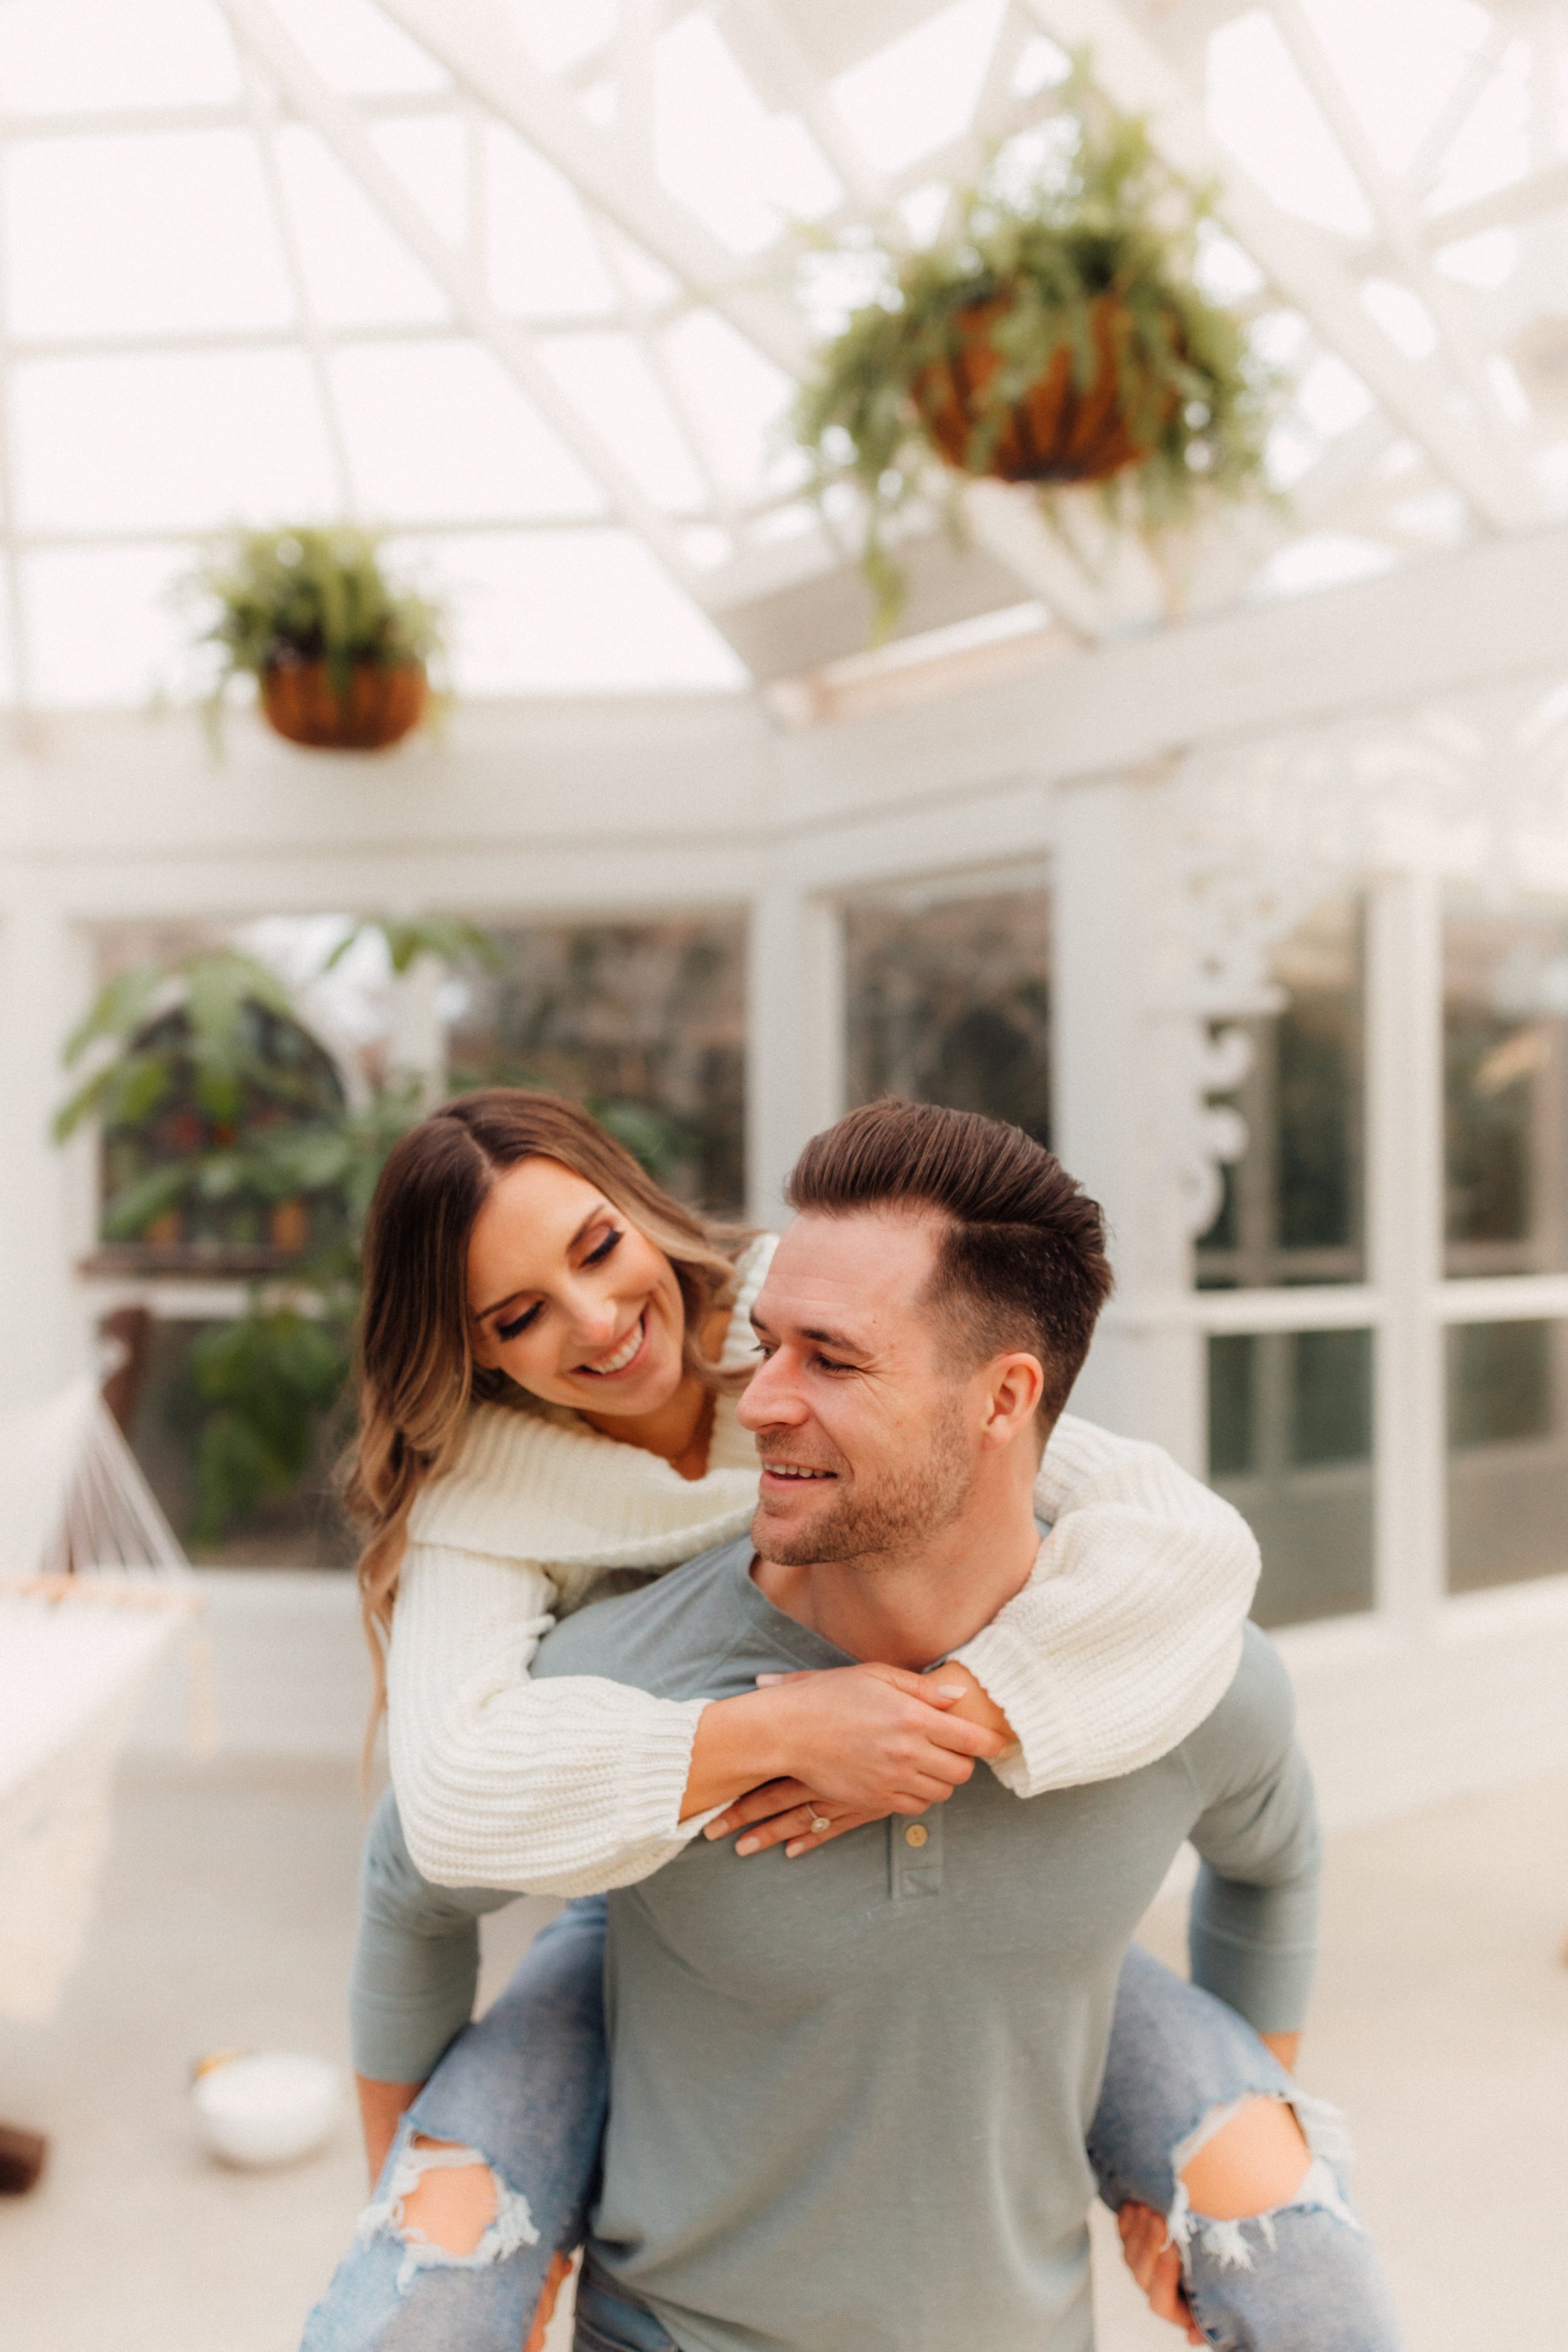 Laura_Ben_Engagment_Session_Winterset_Des_moines_Iowa_Couples_Photographer_Iris_Aisle_Cabin_Conservatory_Candid_Snow_Day_Winter_KMP_Photography-1396.jpg